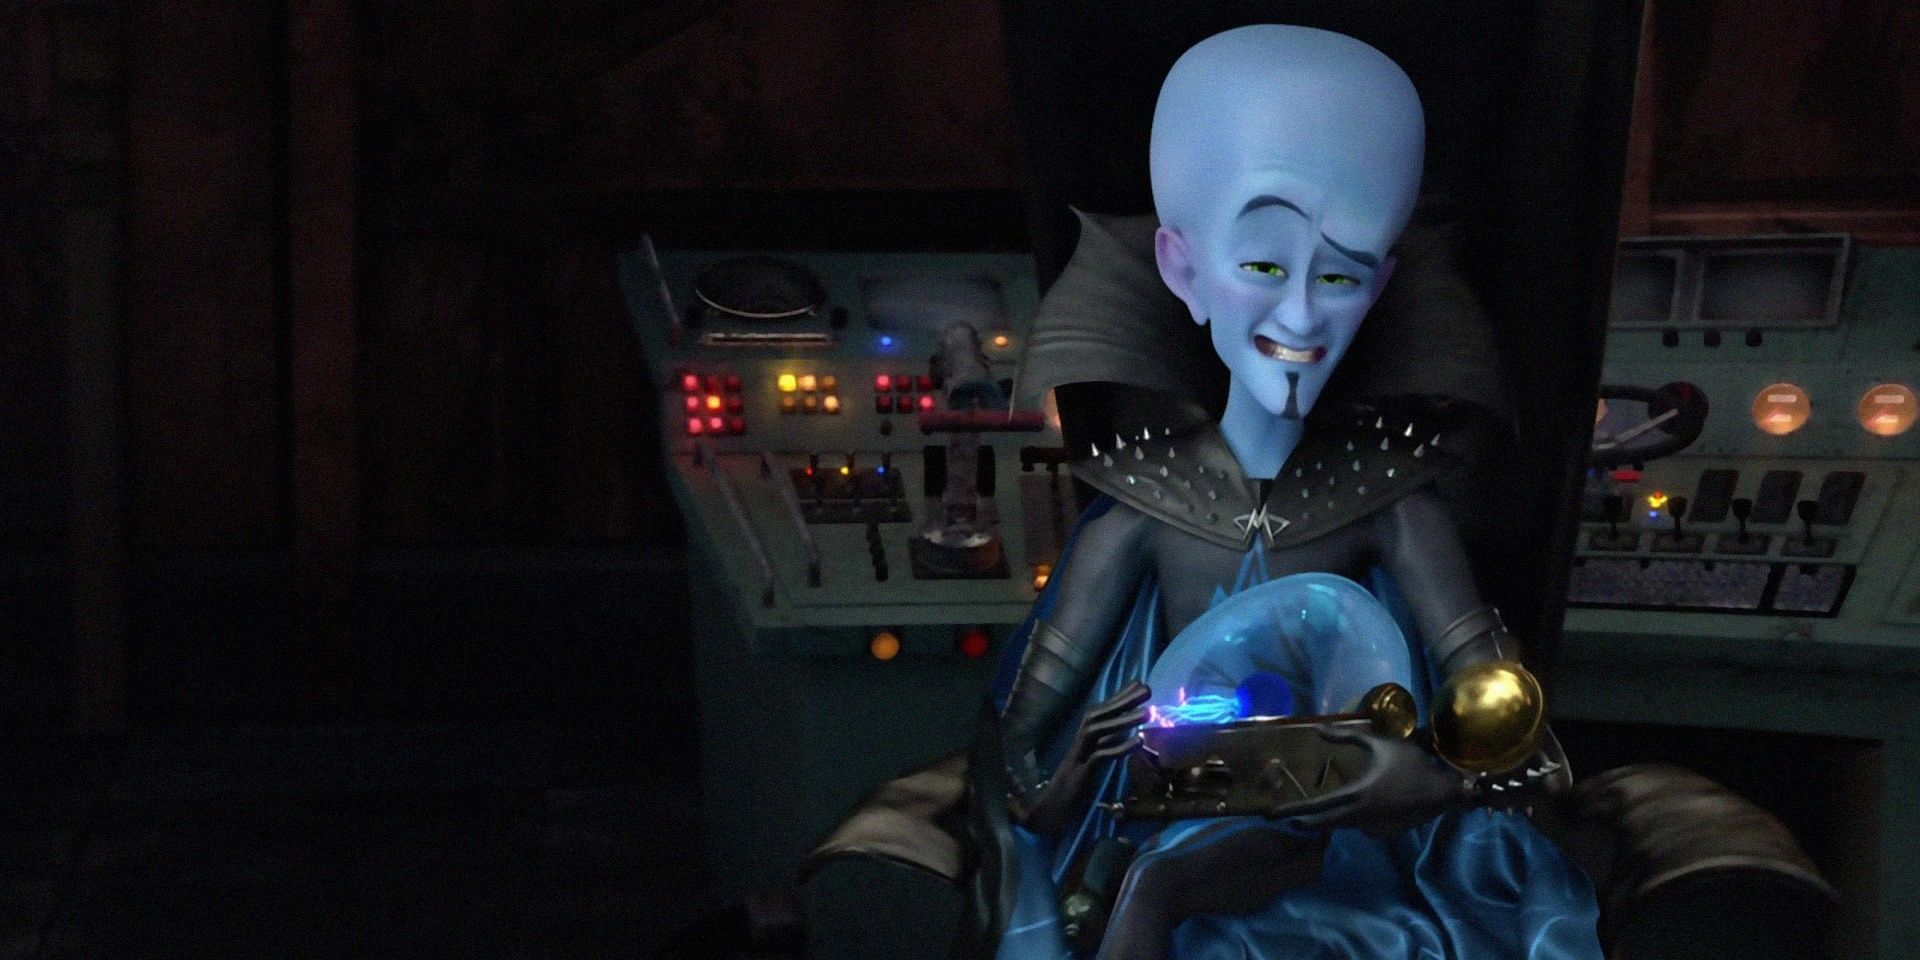 Megamind sitting in his chair in the movie Megamind